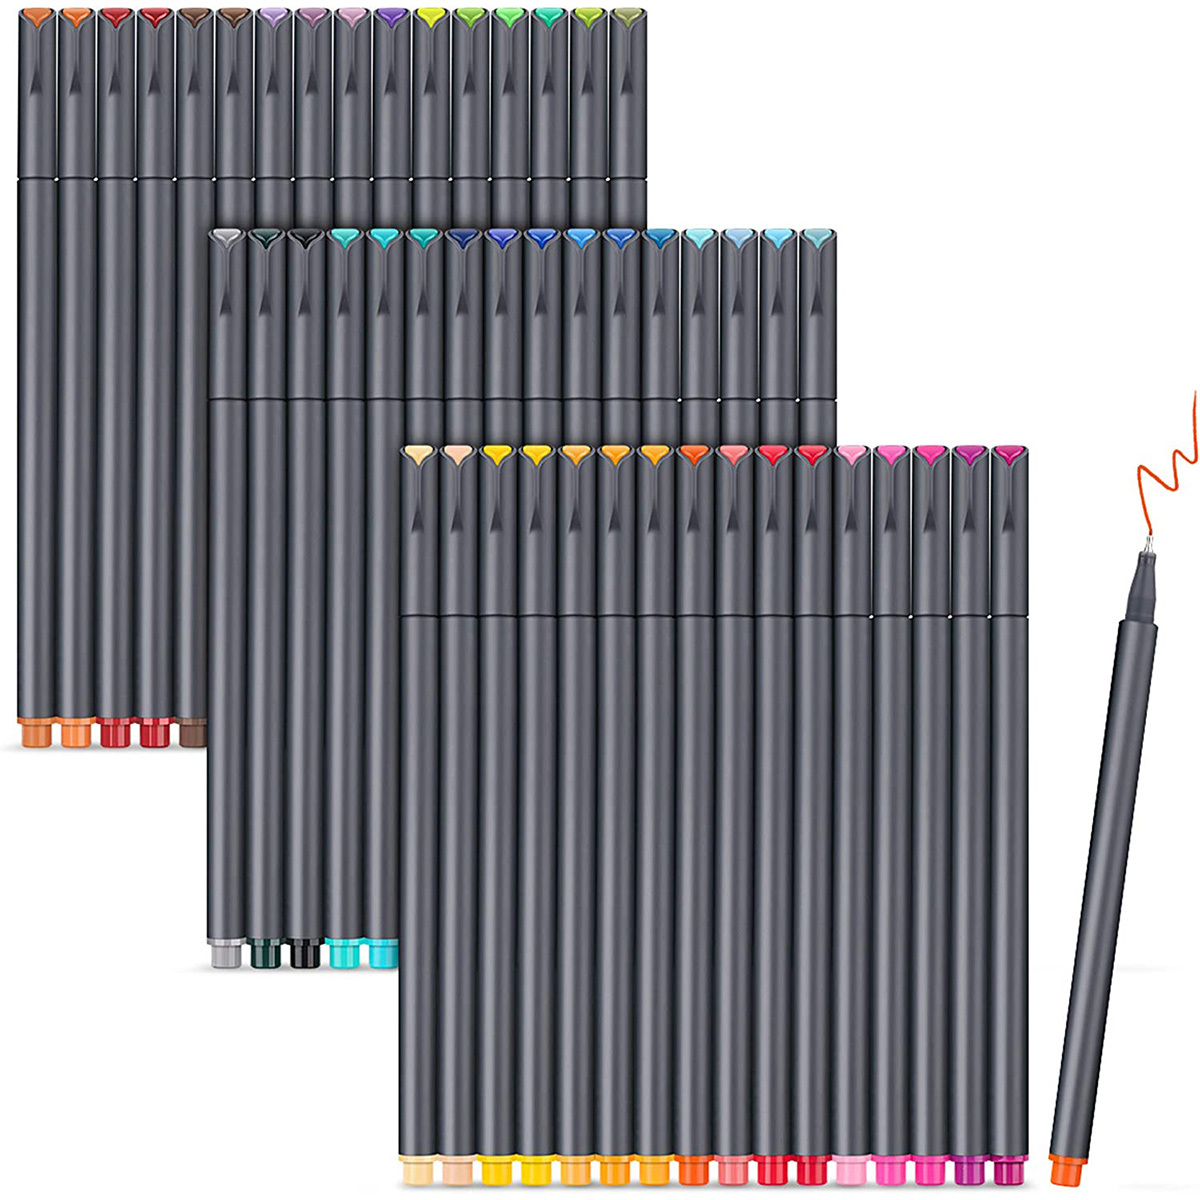 Teskyer 48 Colors Journal Planner Pens, Colored Pens Fine Point Markers  Drawing Pens Porous Fineliner Pen for Writing Note Taking Calendar Coloring